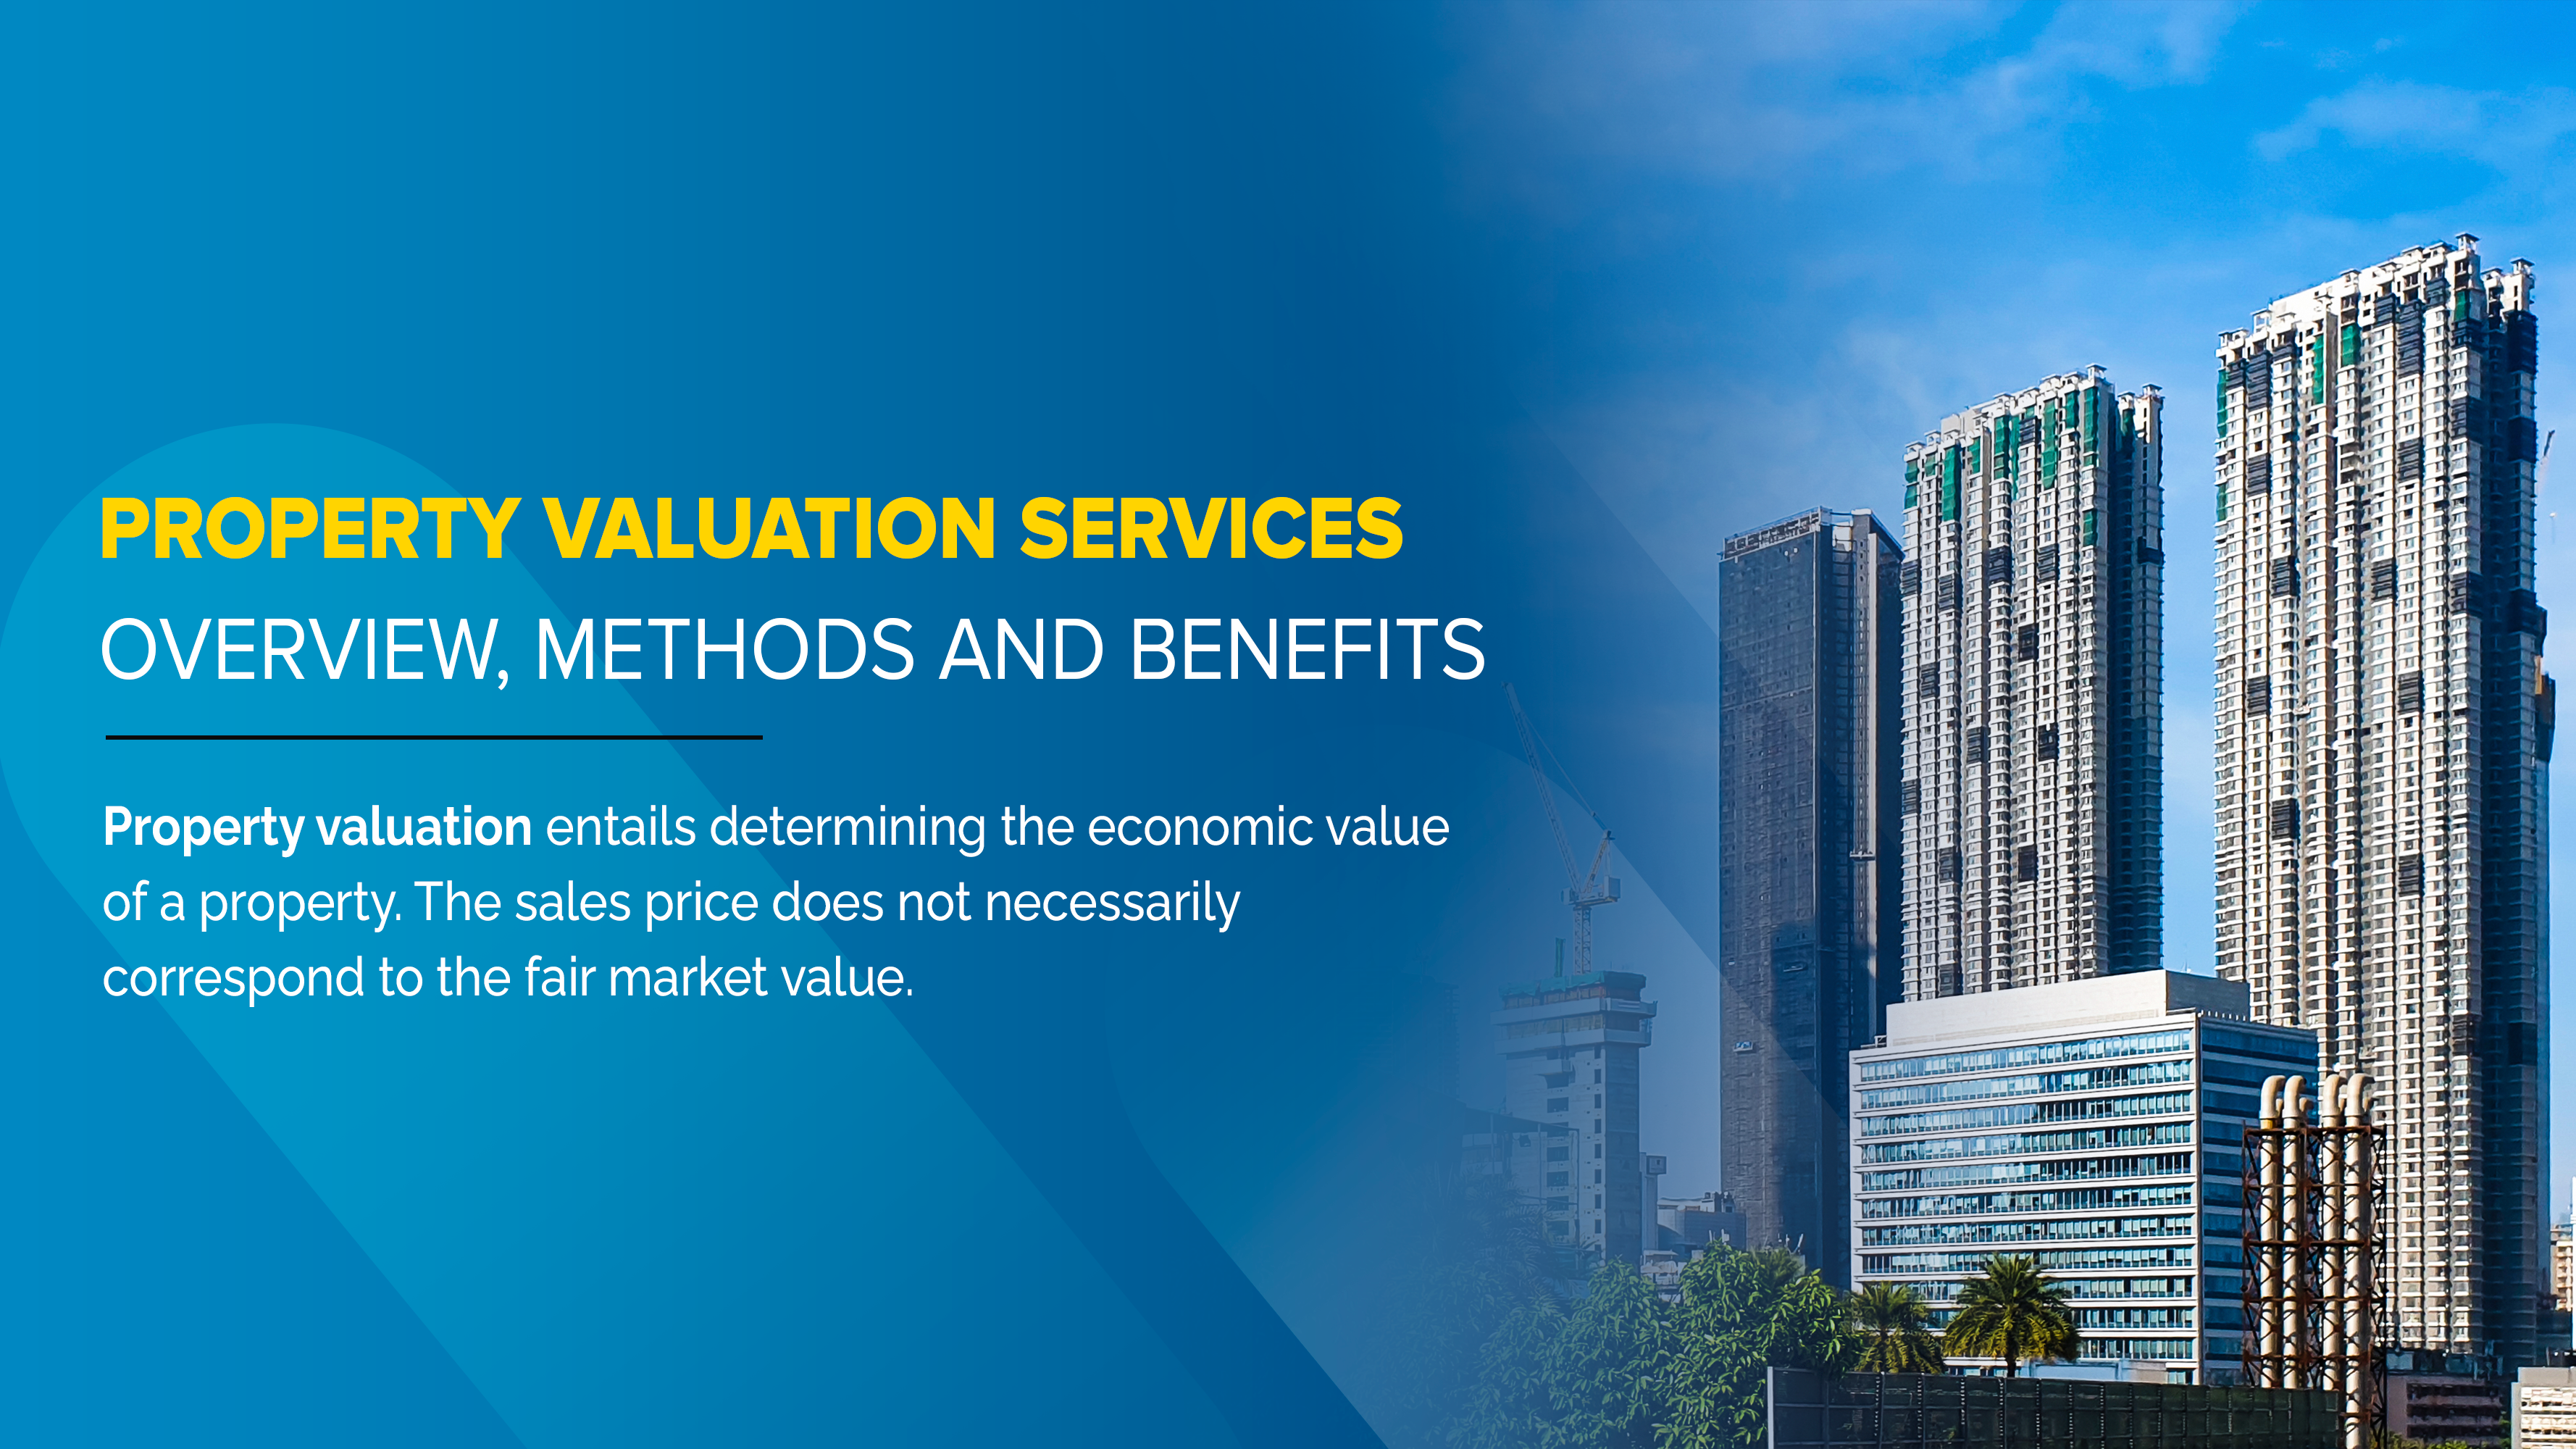 Property Valuation Services - Overview, Methods and Benefits